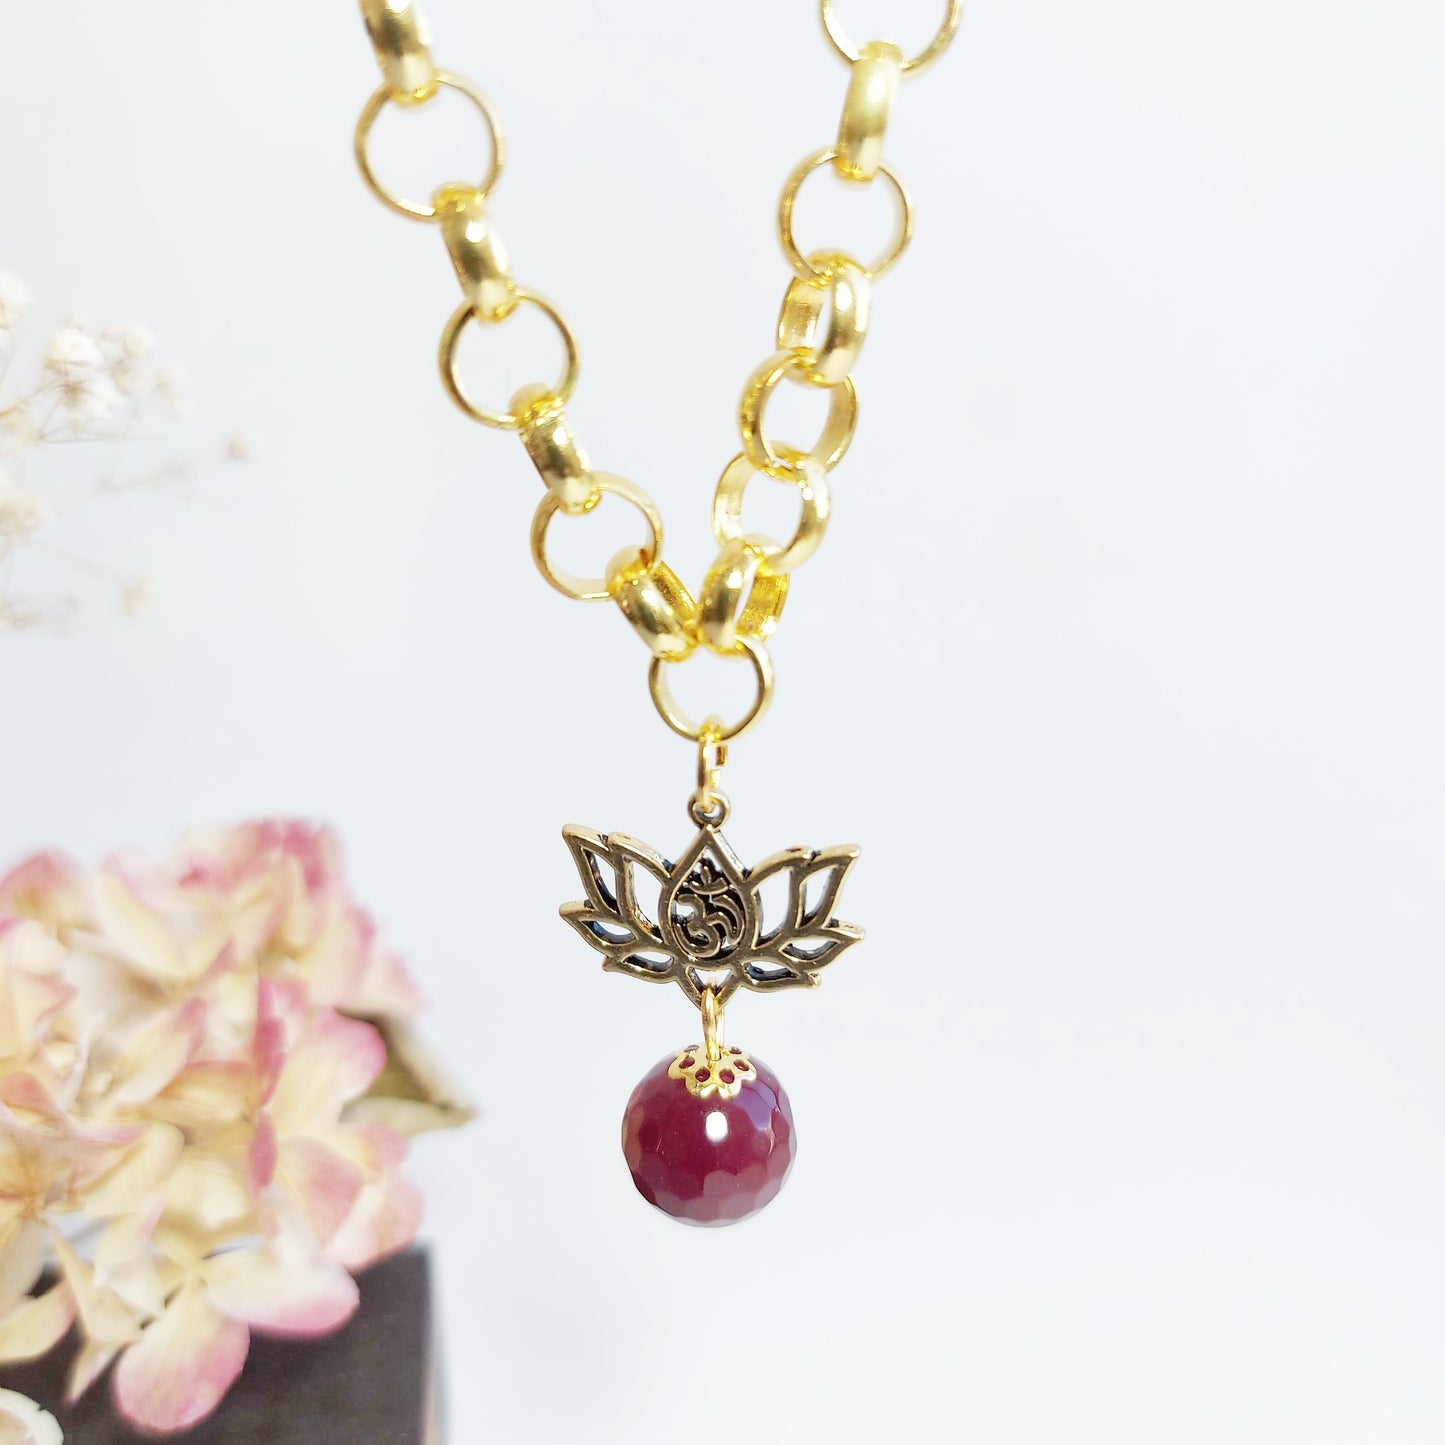 JENNA RED MAGIC Boho Necklace with Agate and AUM in Lotus pendant